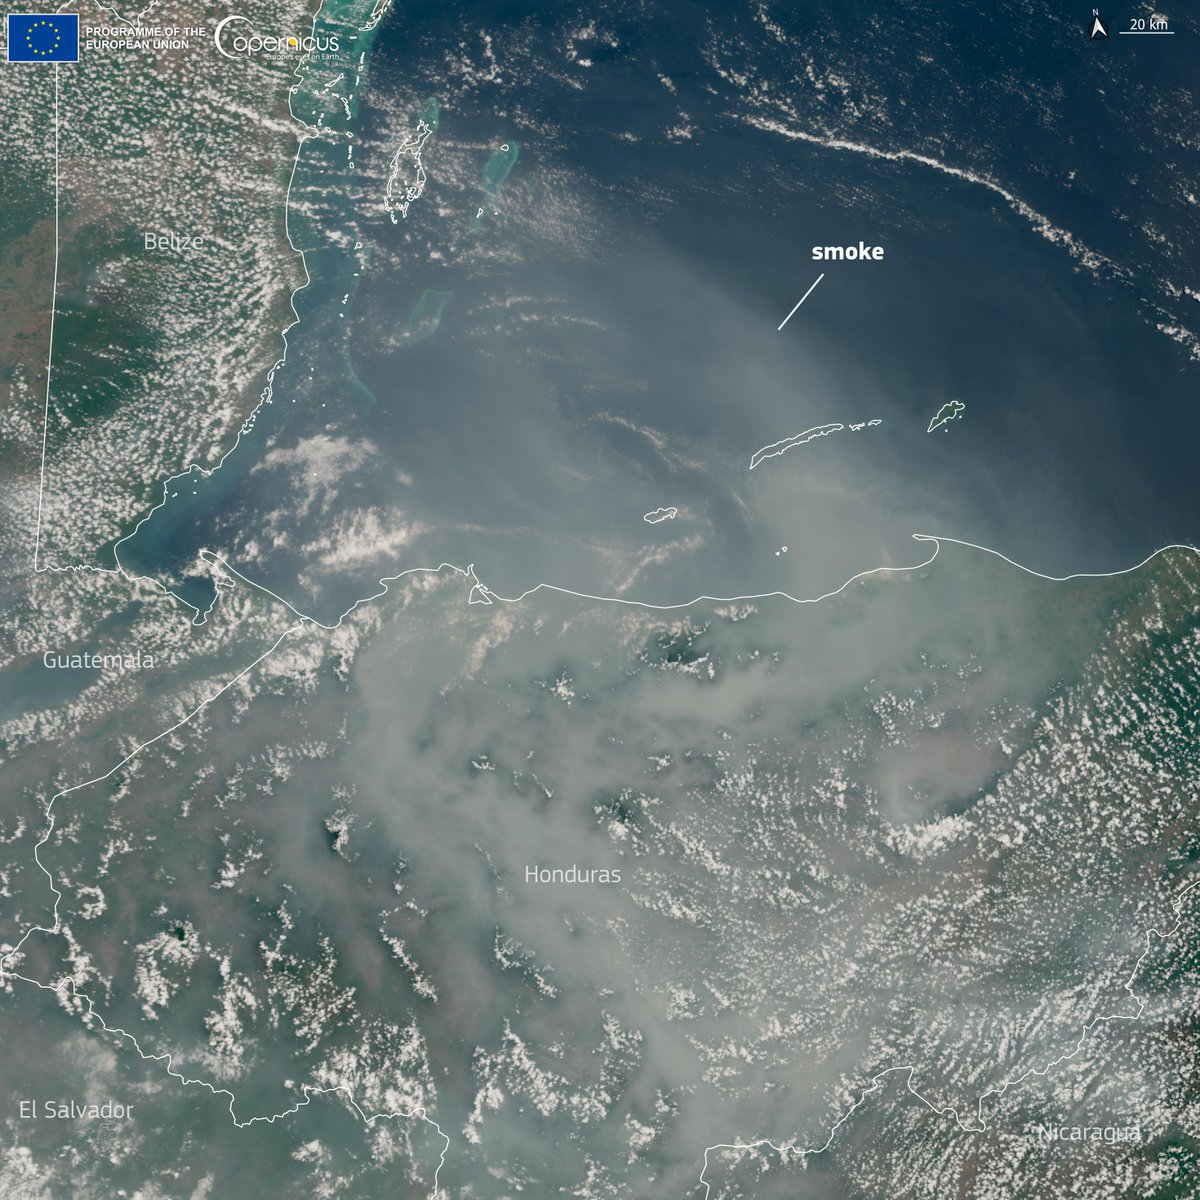 #Copernicus for #AirQuality Numerous fires are burning in Central America🌎 The large amounts of smoke produced heavily affect #AirQuality and visibility in the area 🇭🇳🇬🇹🇧🇿 ⬇️#Sentinel3 image from 21 May